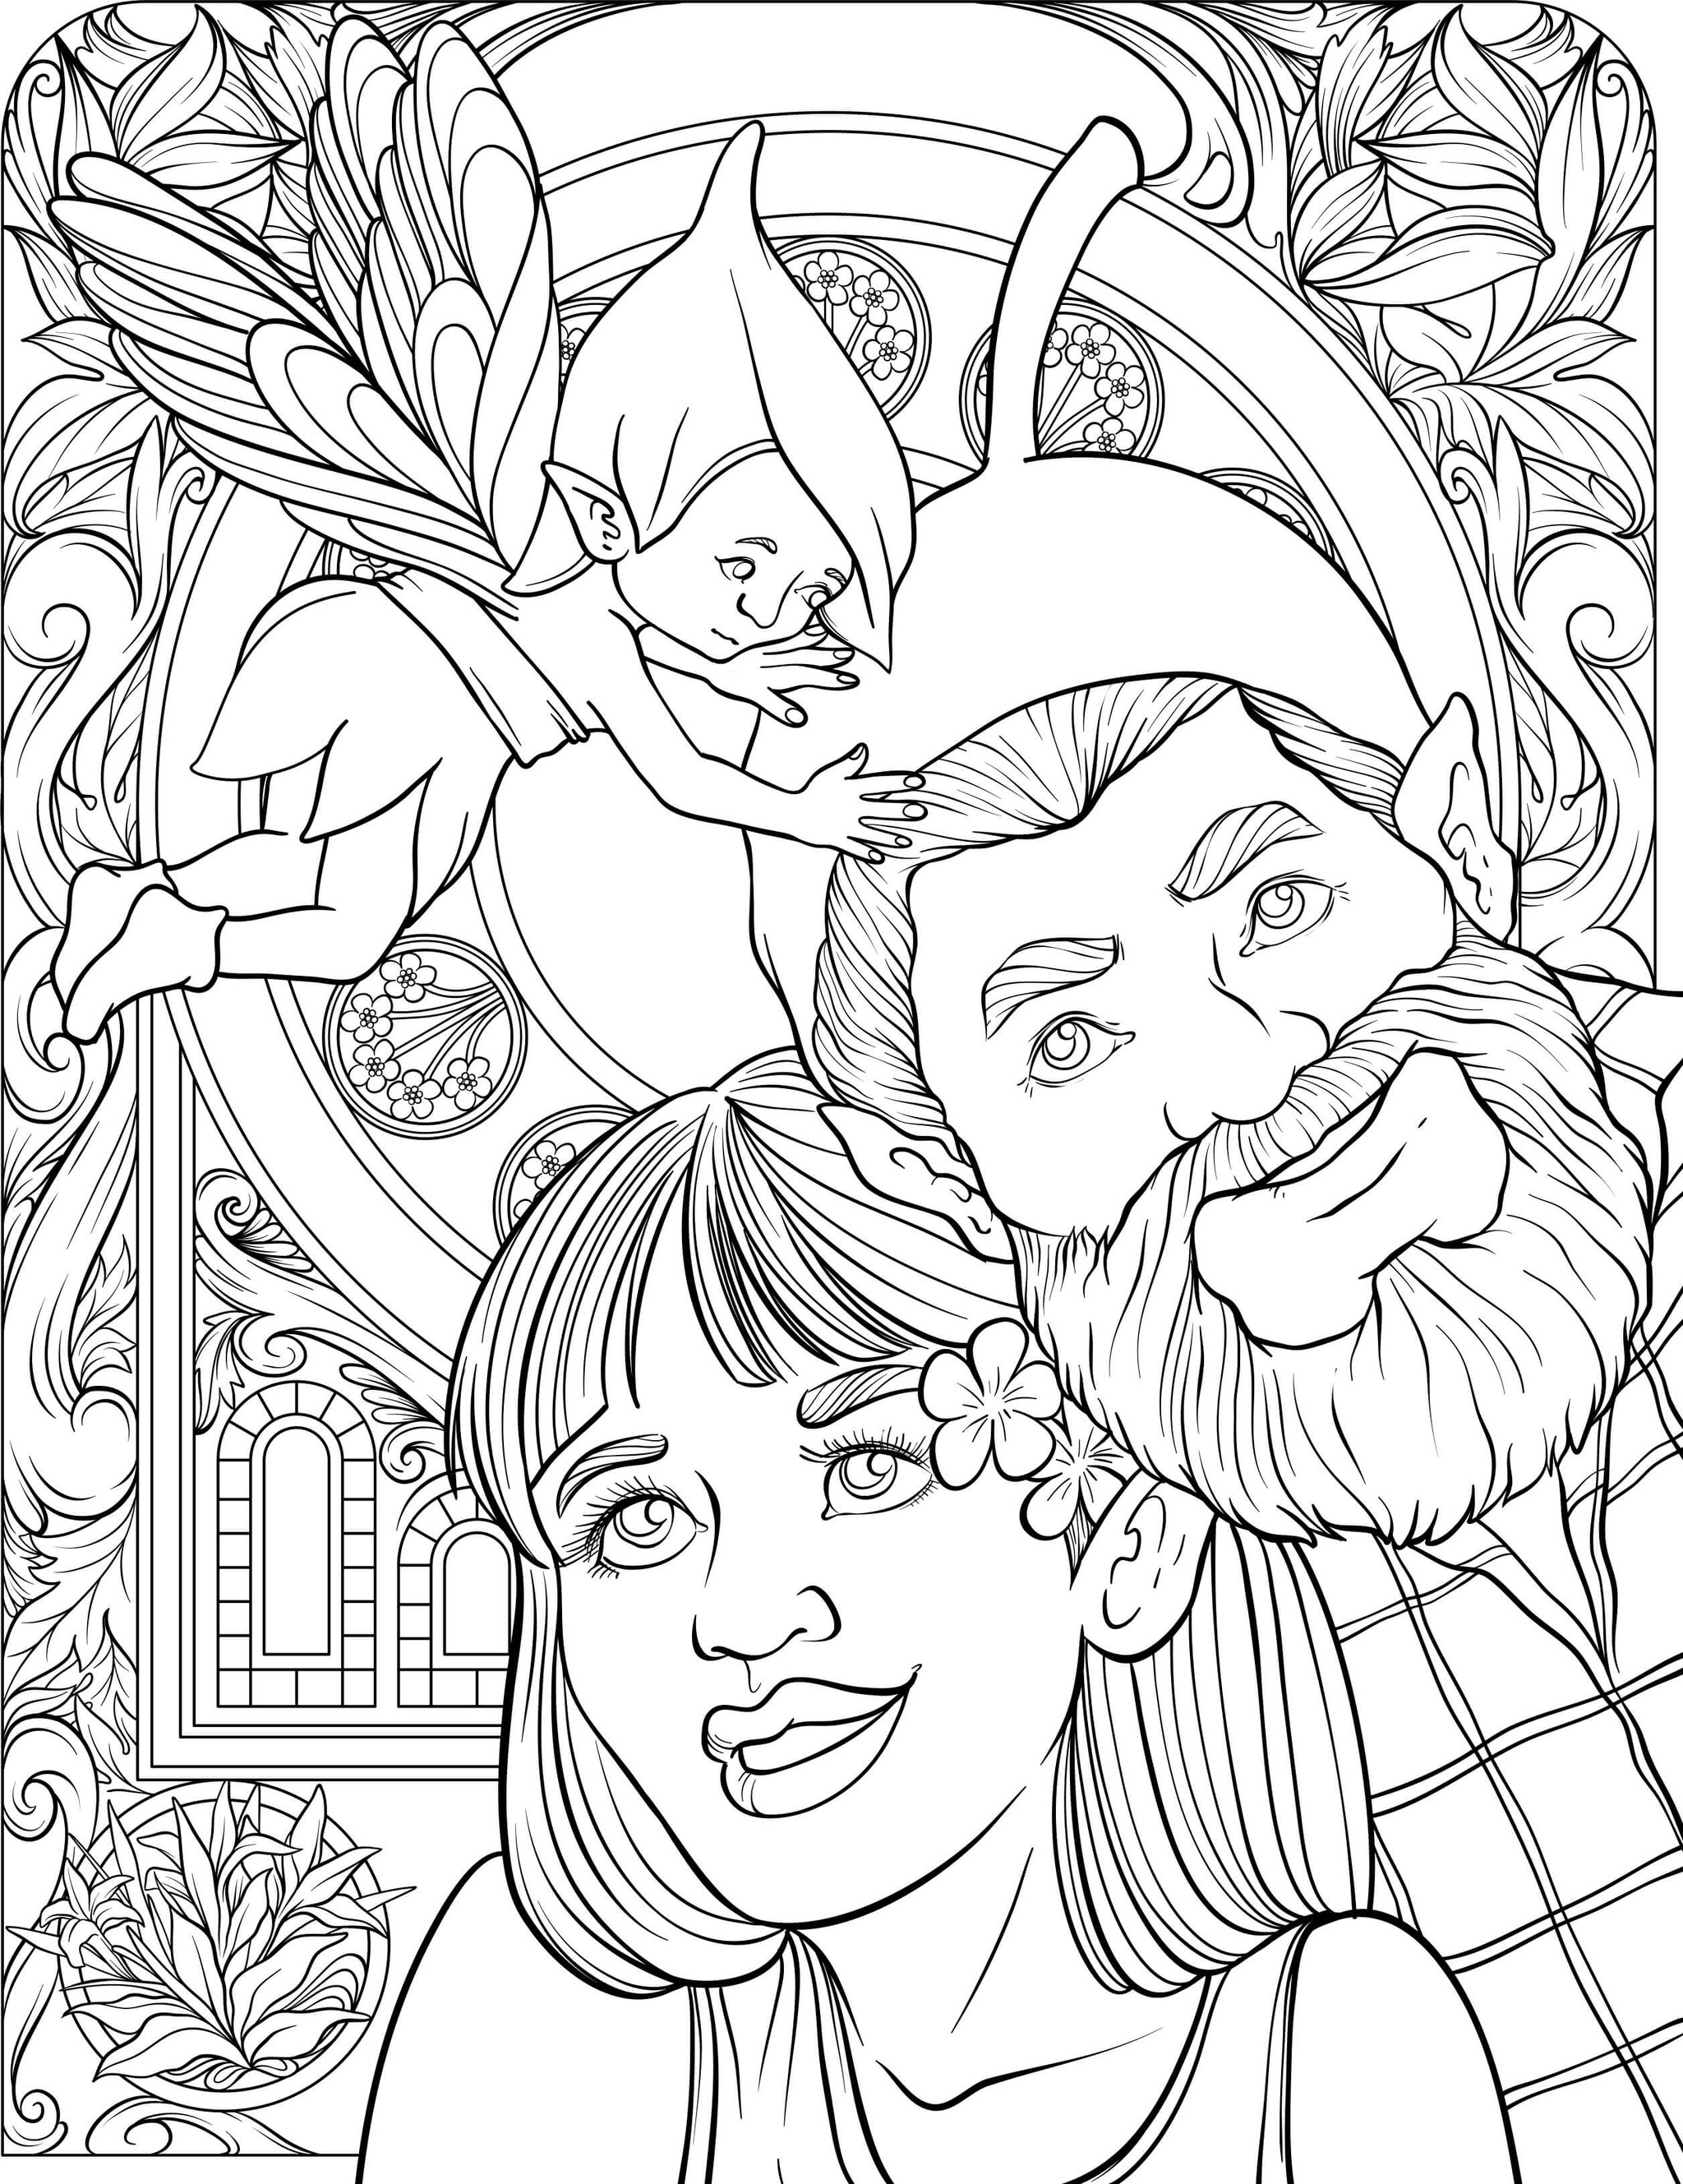 ColorIt Coloring Books Group Freebie - Family 02-15-21